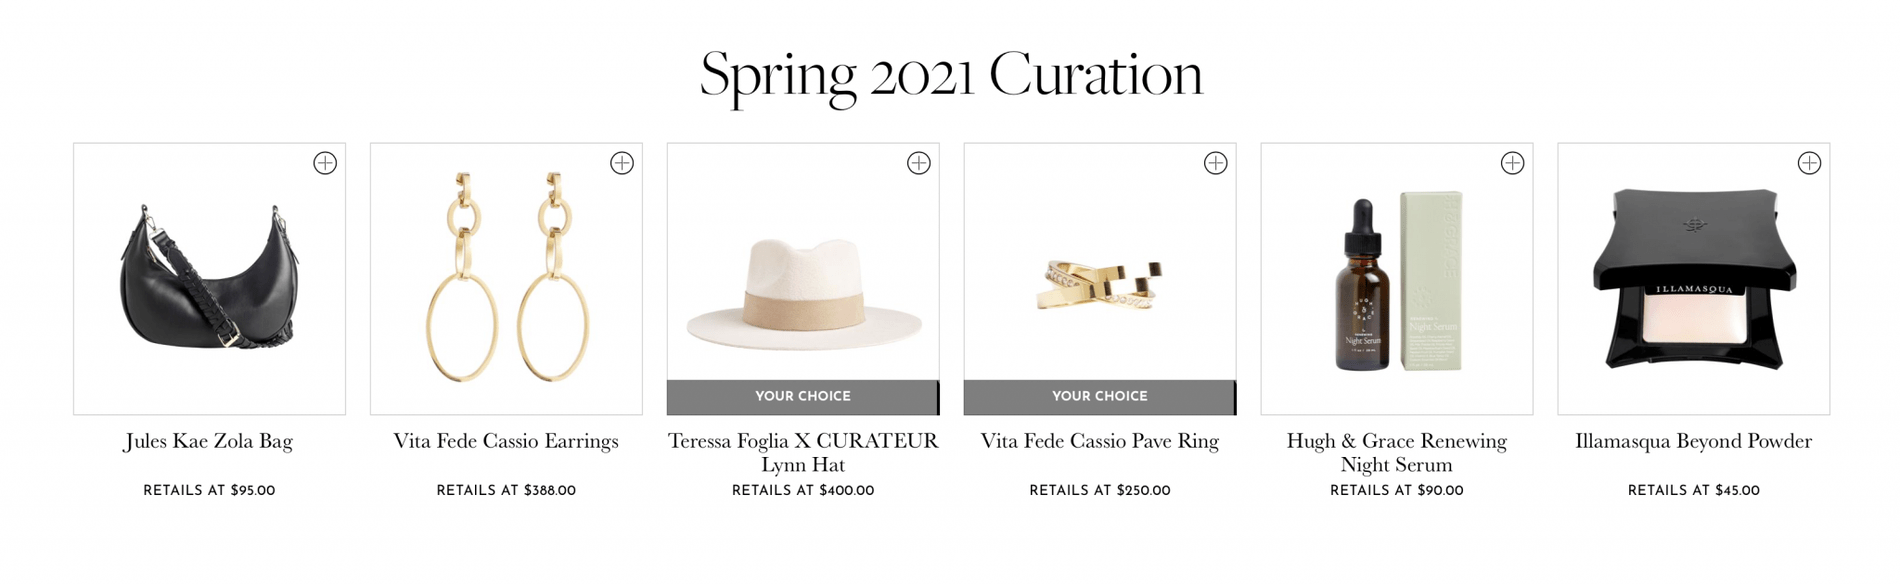 CURATEUR Spring 2021 Coupon Code – Save $25 + Get A FREE Gift